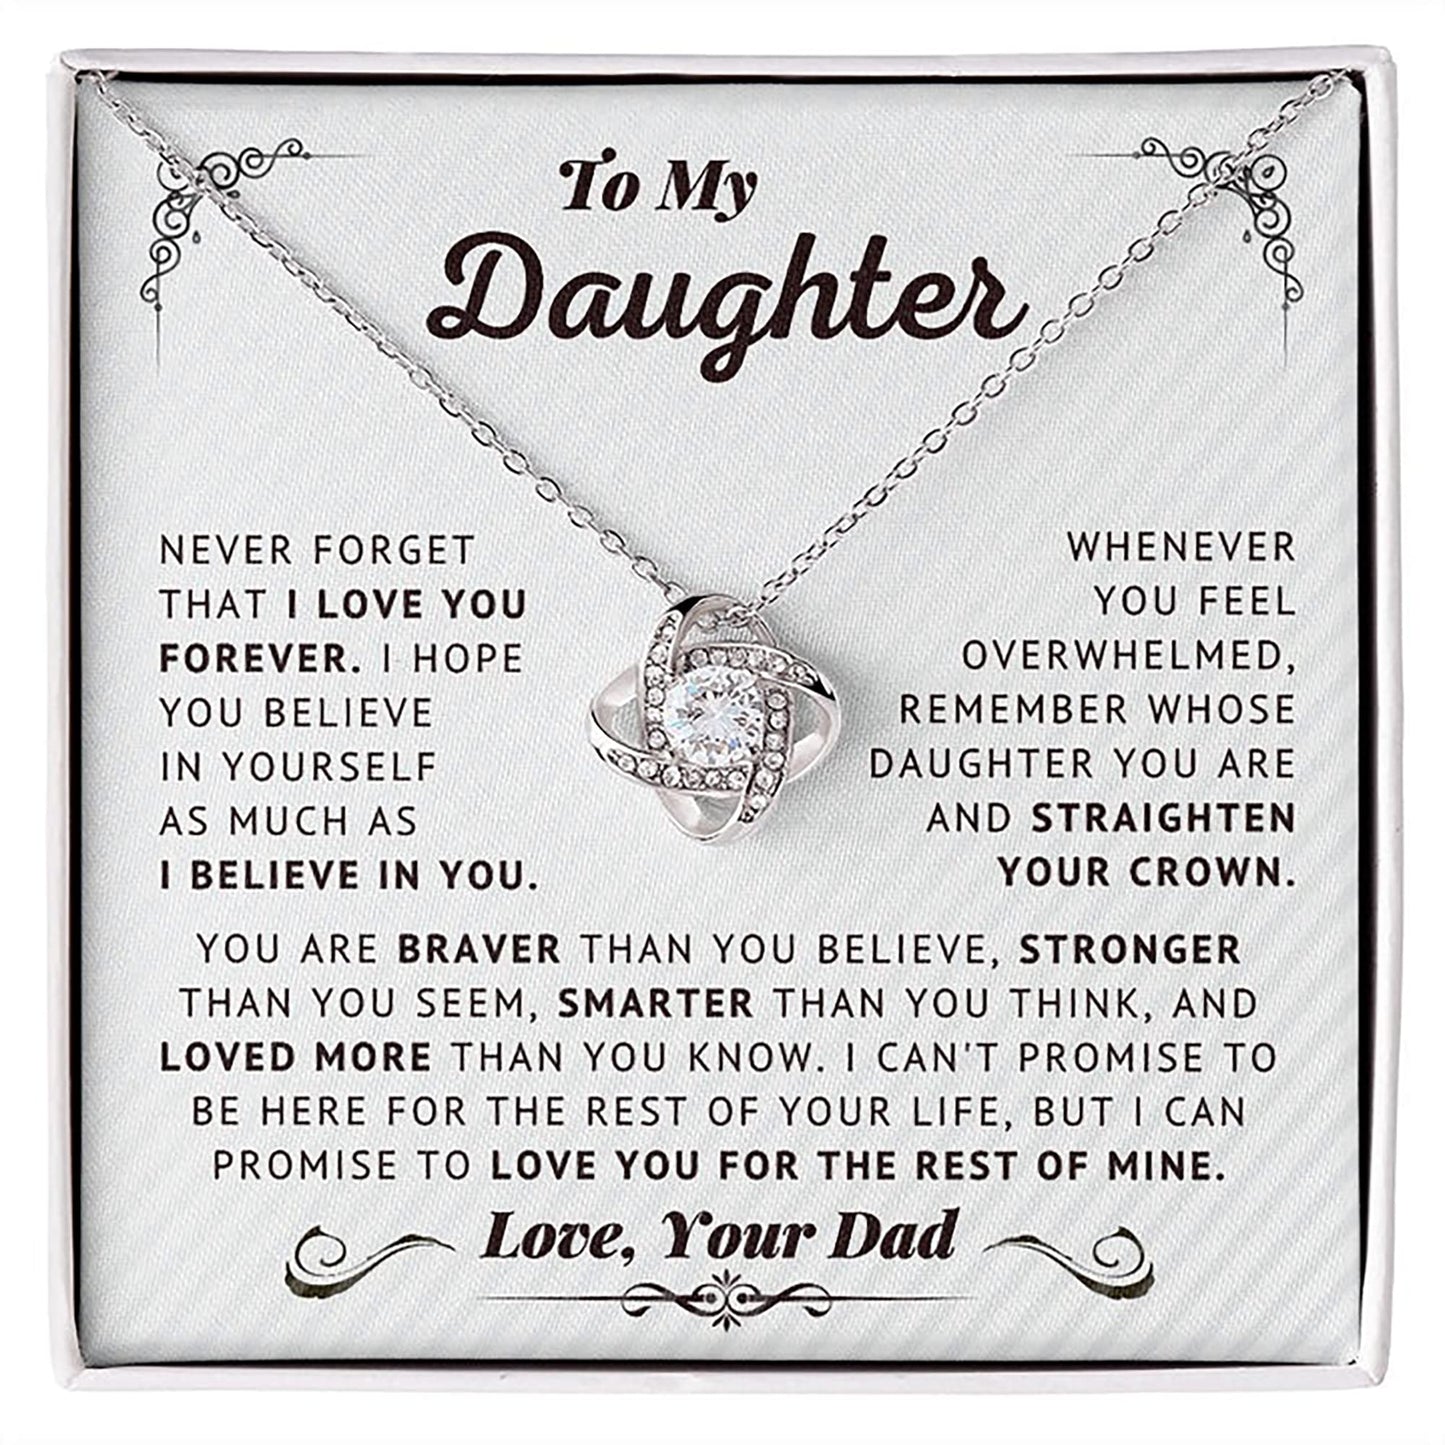 Daughter Gifts From Dad - To My Daughter Necklace From Dad Believe In Yourself Love Knot Necklace Gifts For Daughter On Birthday Gifts For Daughter Father Daughter Gifts Christmas Graduation Valentine Idea Gifts